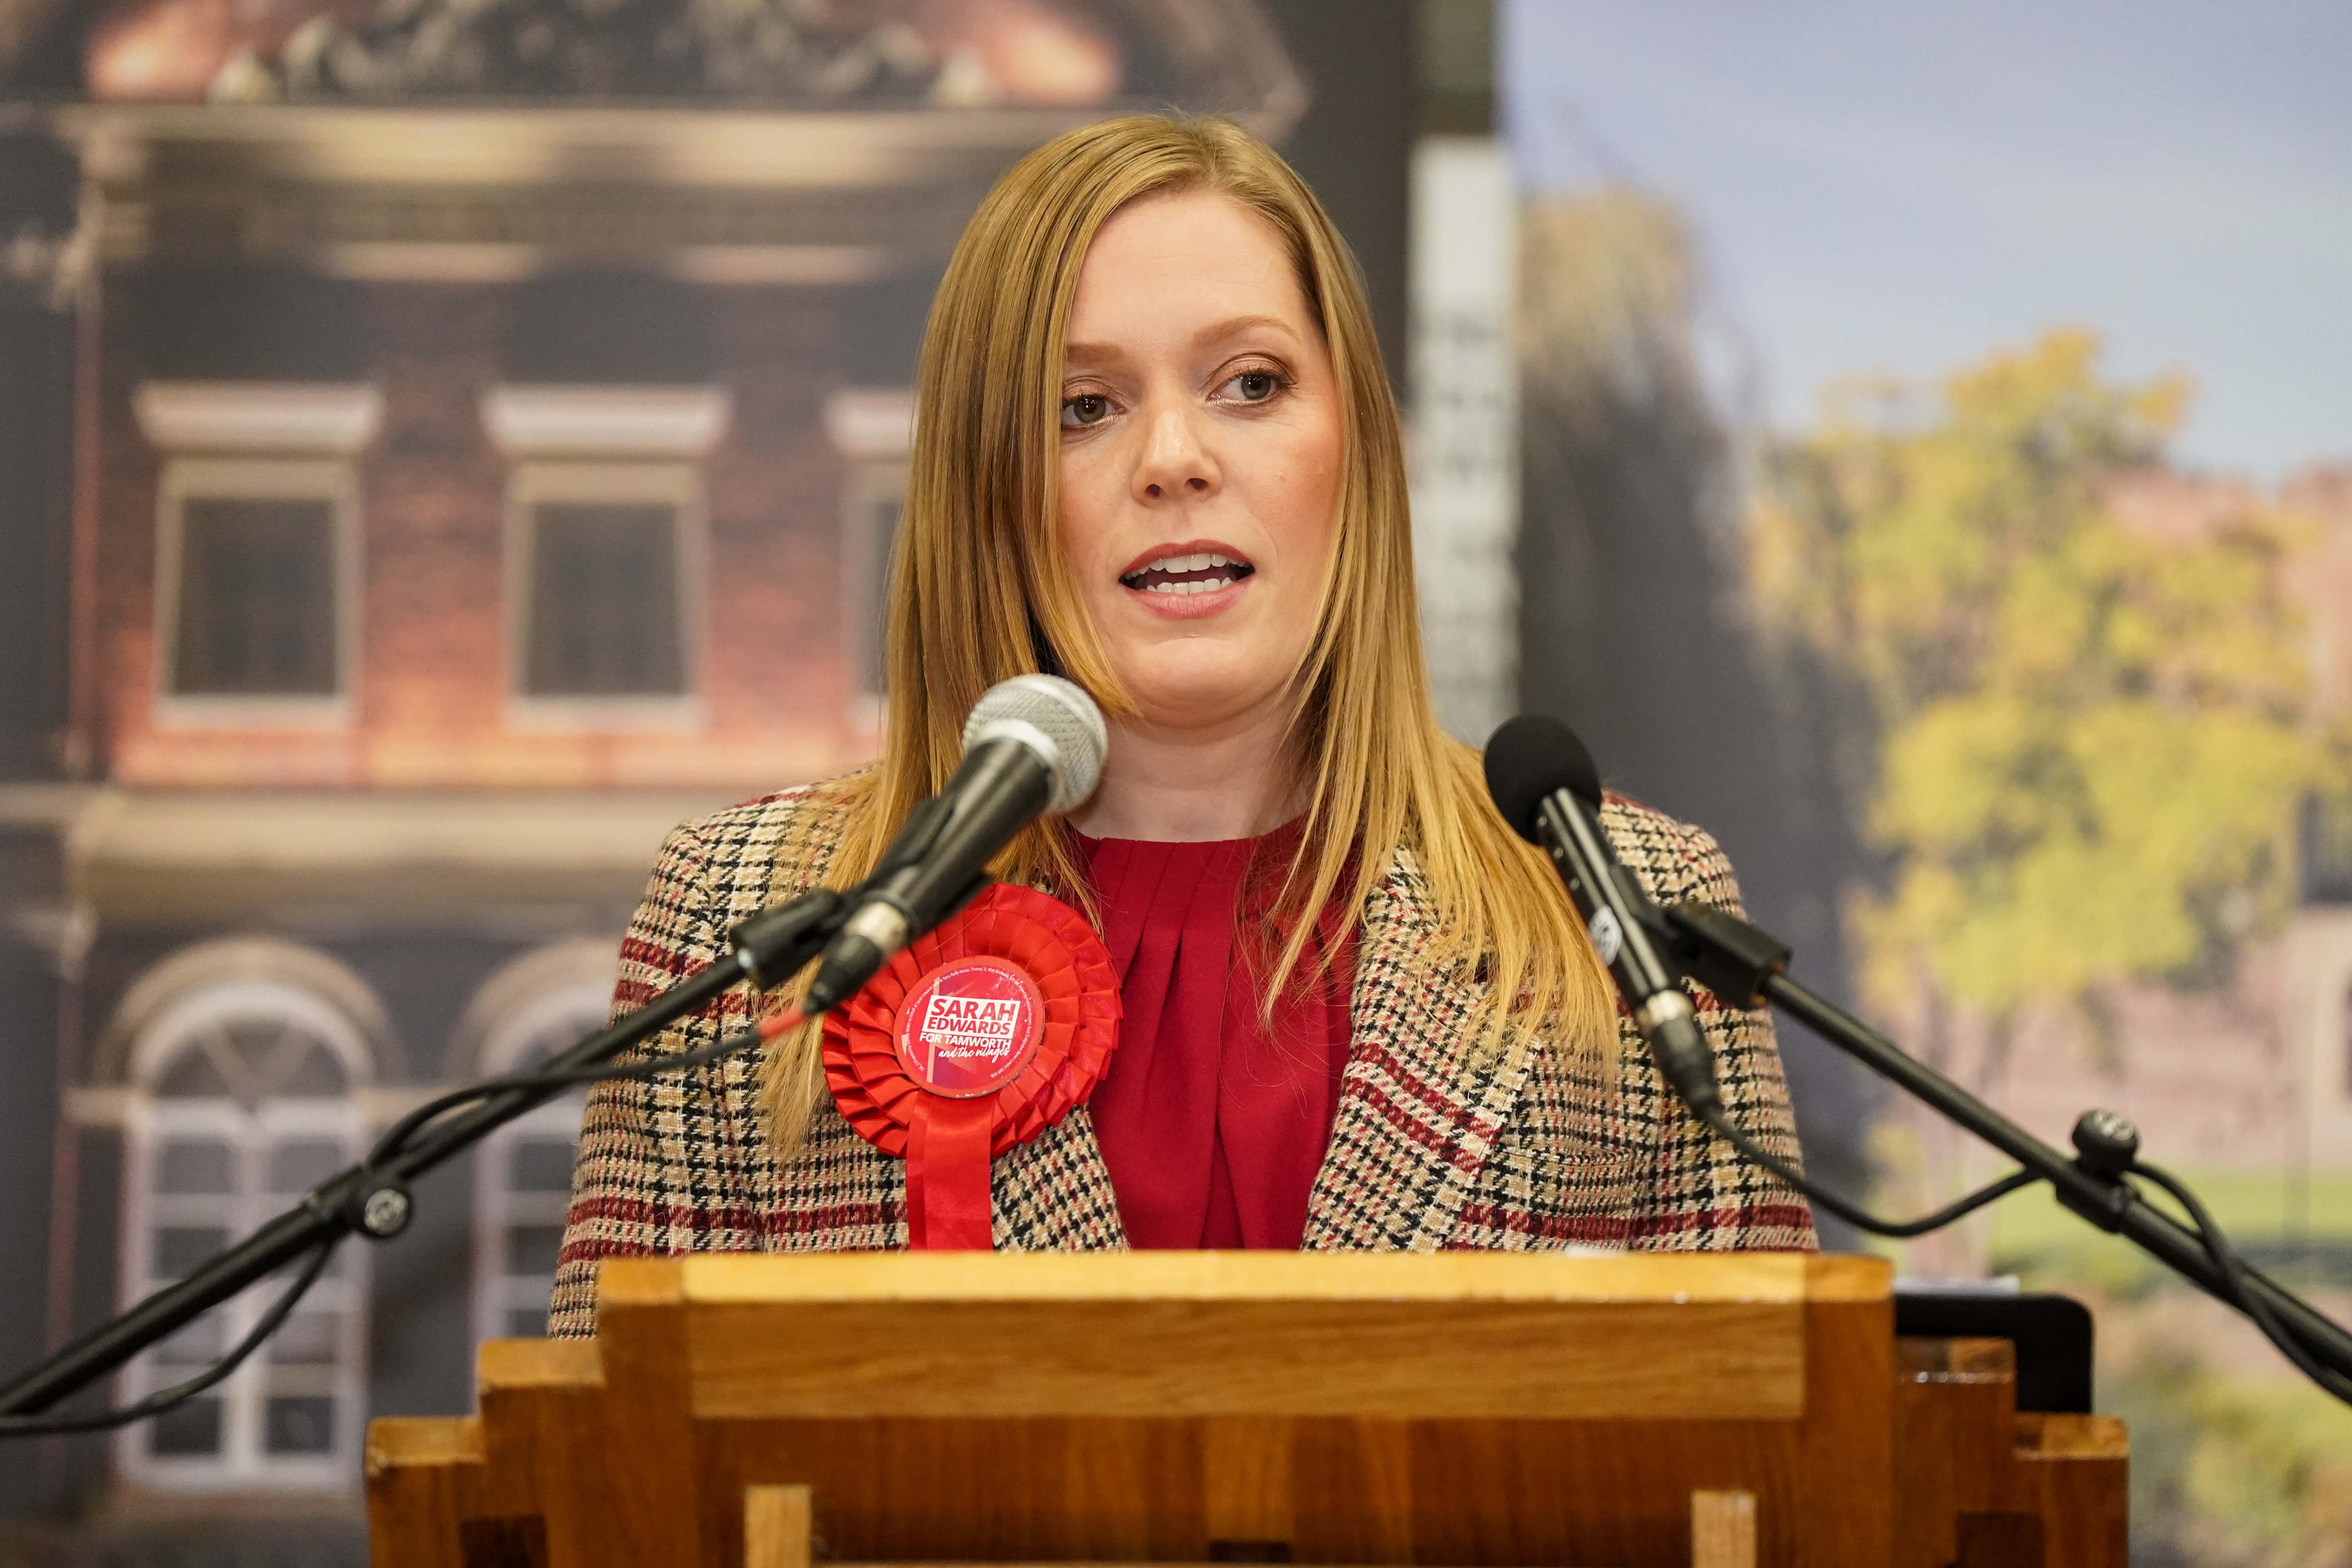 <p>Sarah Edwards of Labour gives a victory speech after being declared the Member of Parliament for Tamworth following Thursday's by-election. </p>